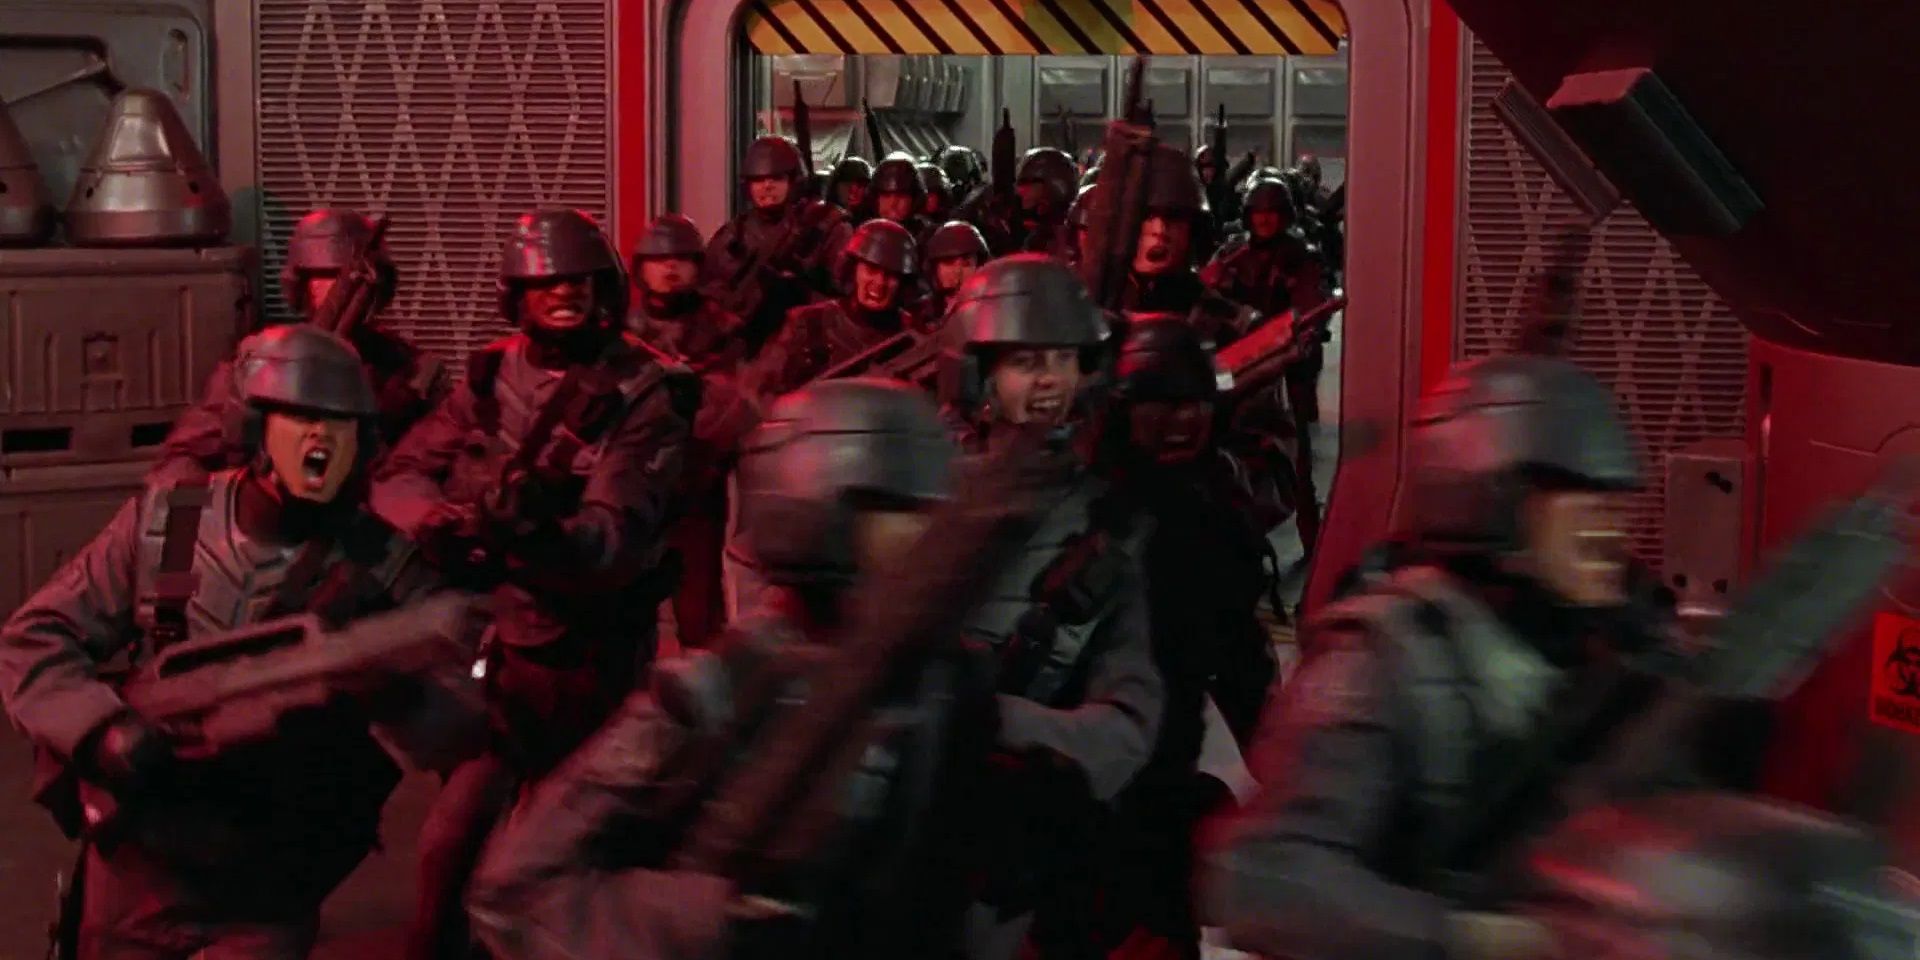 The soldiers march into war in Starship Troopers